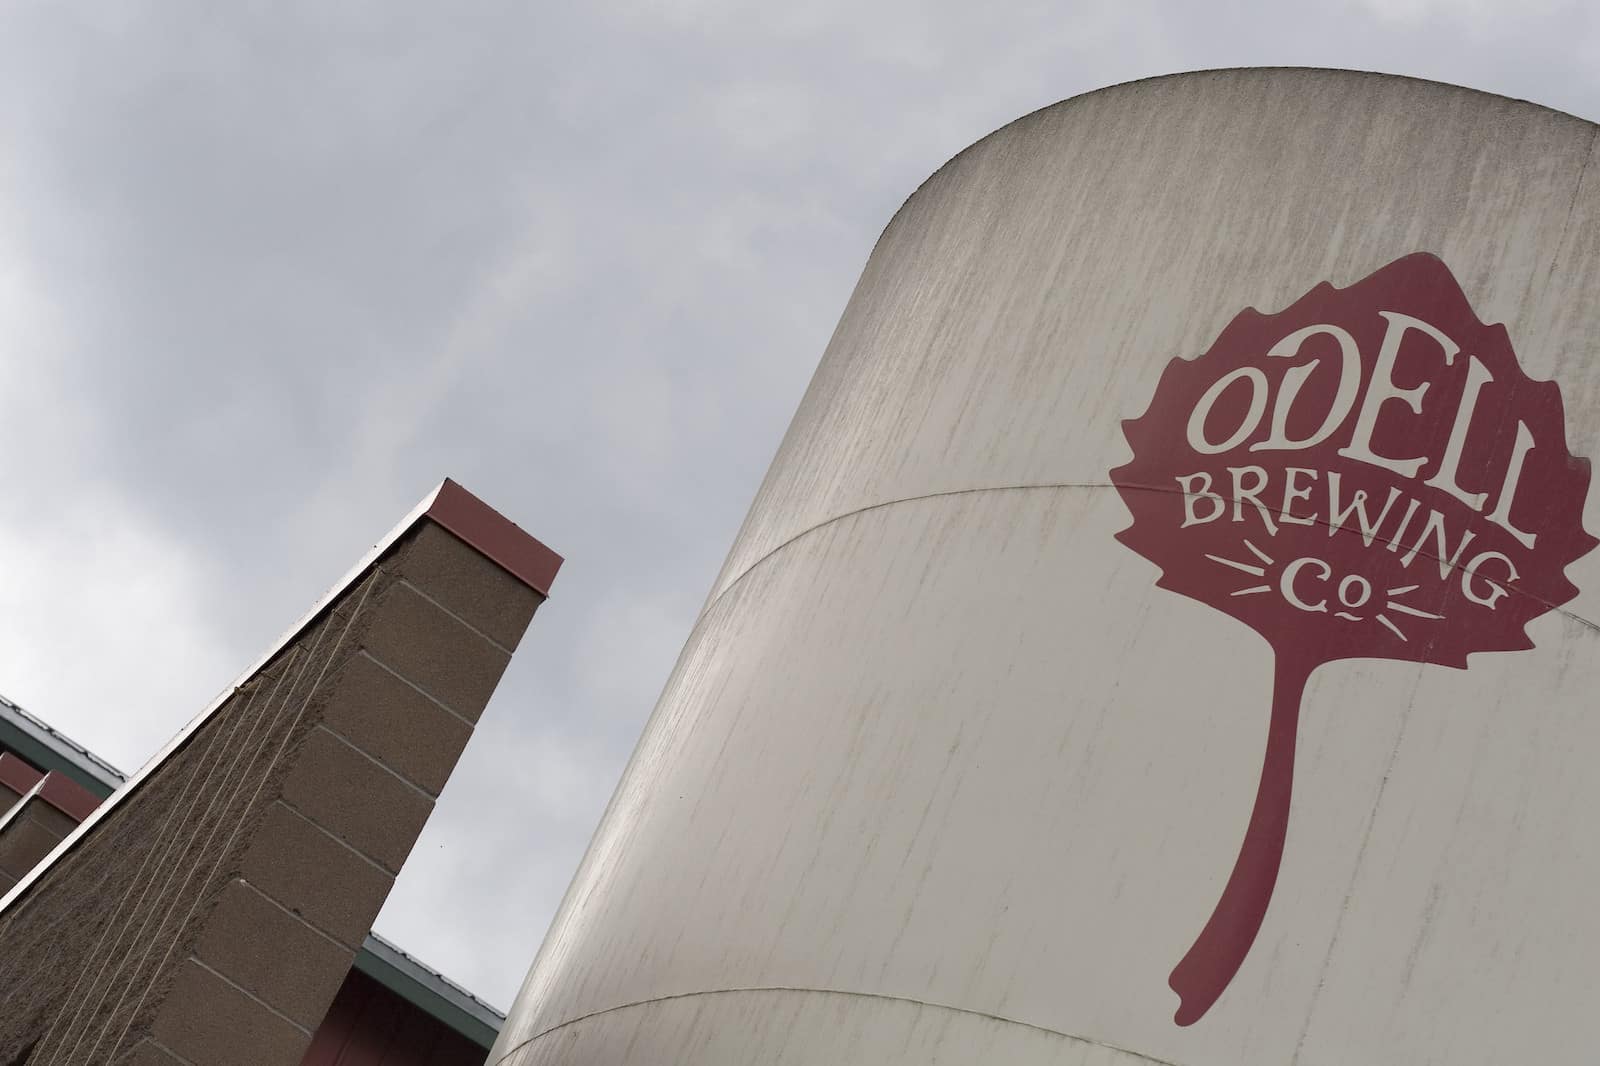 Image of the Odell Brewing Co in Fort Collins, Colorado